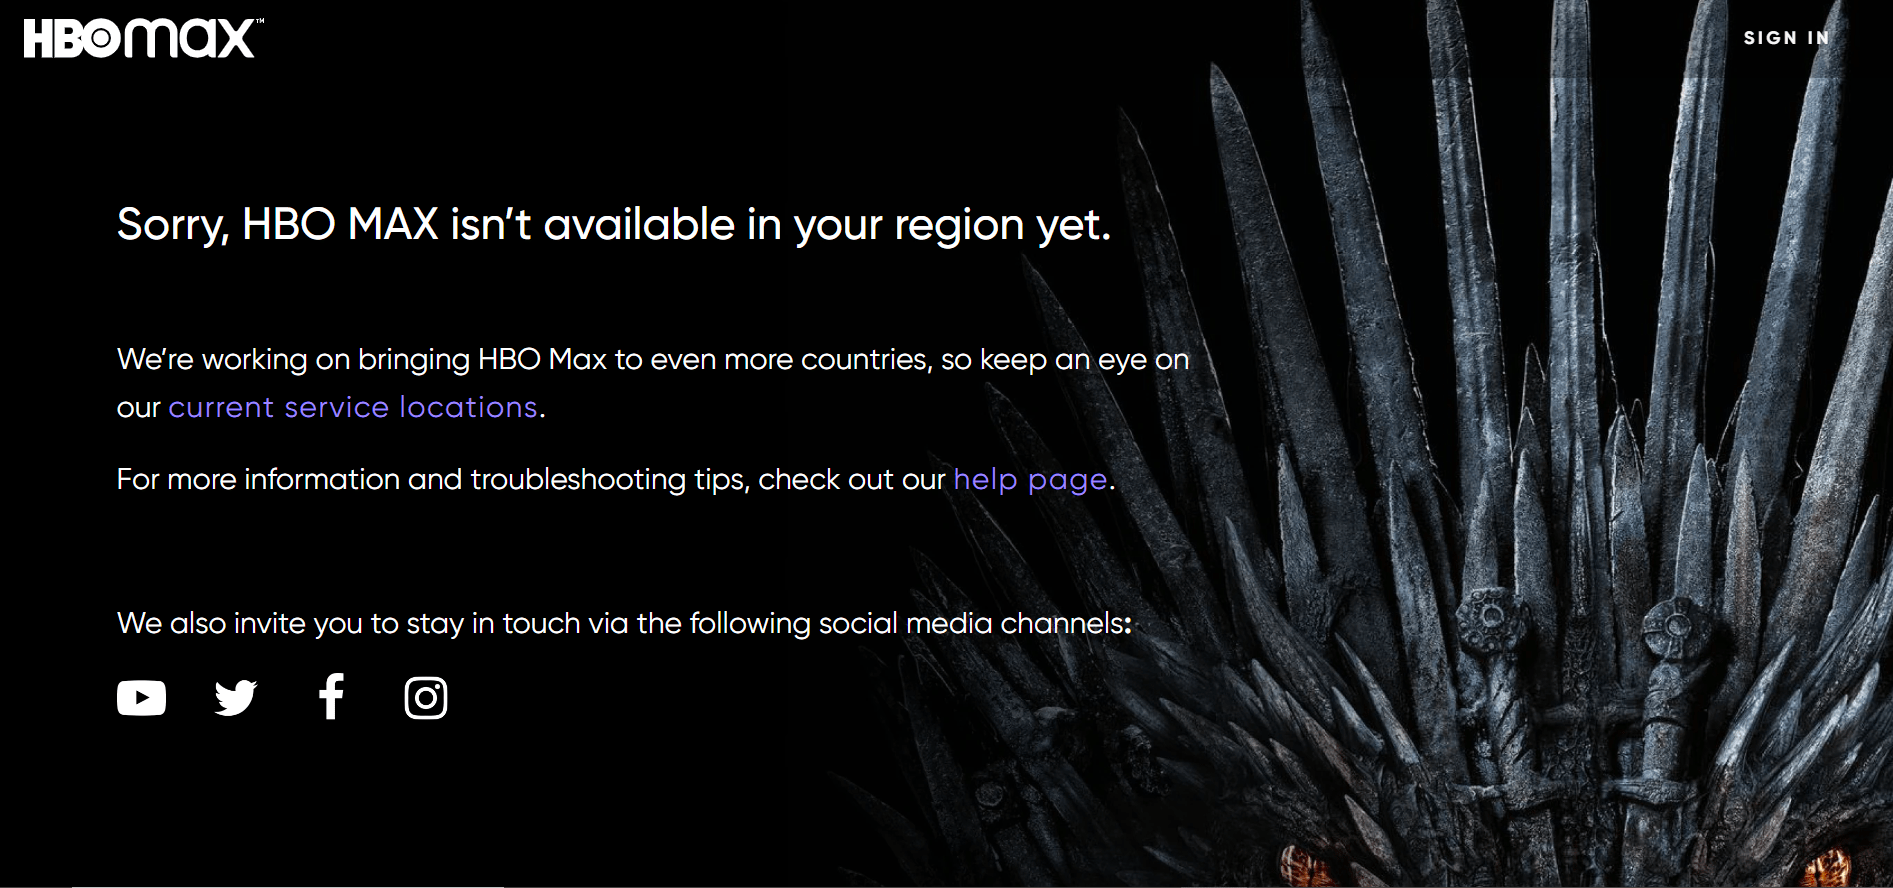 Why Do You Need a VPN to Watch HBO Max in Poland?